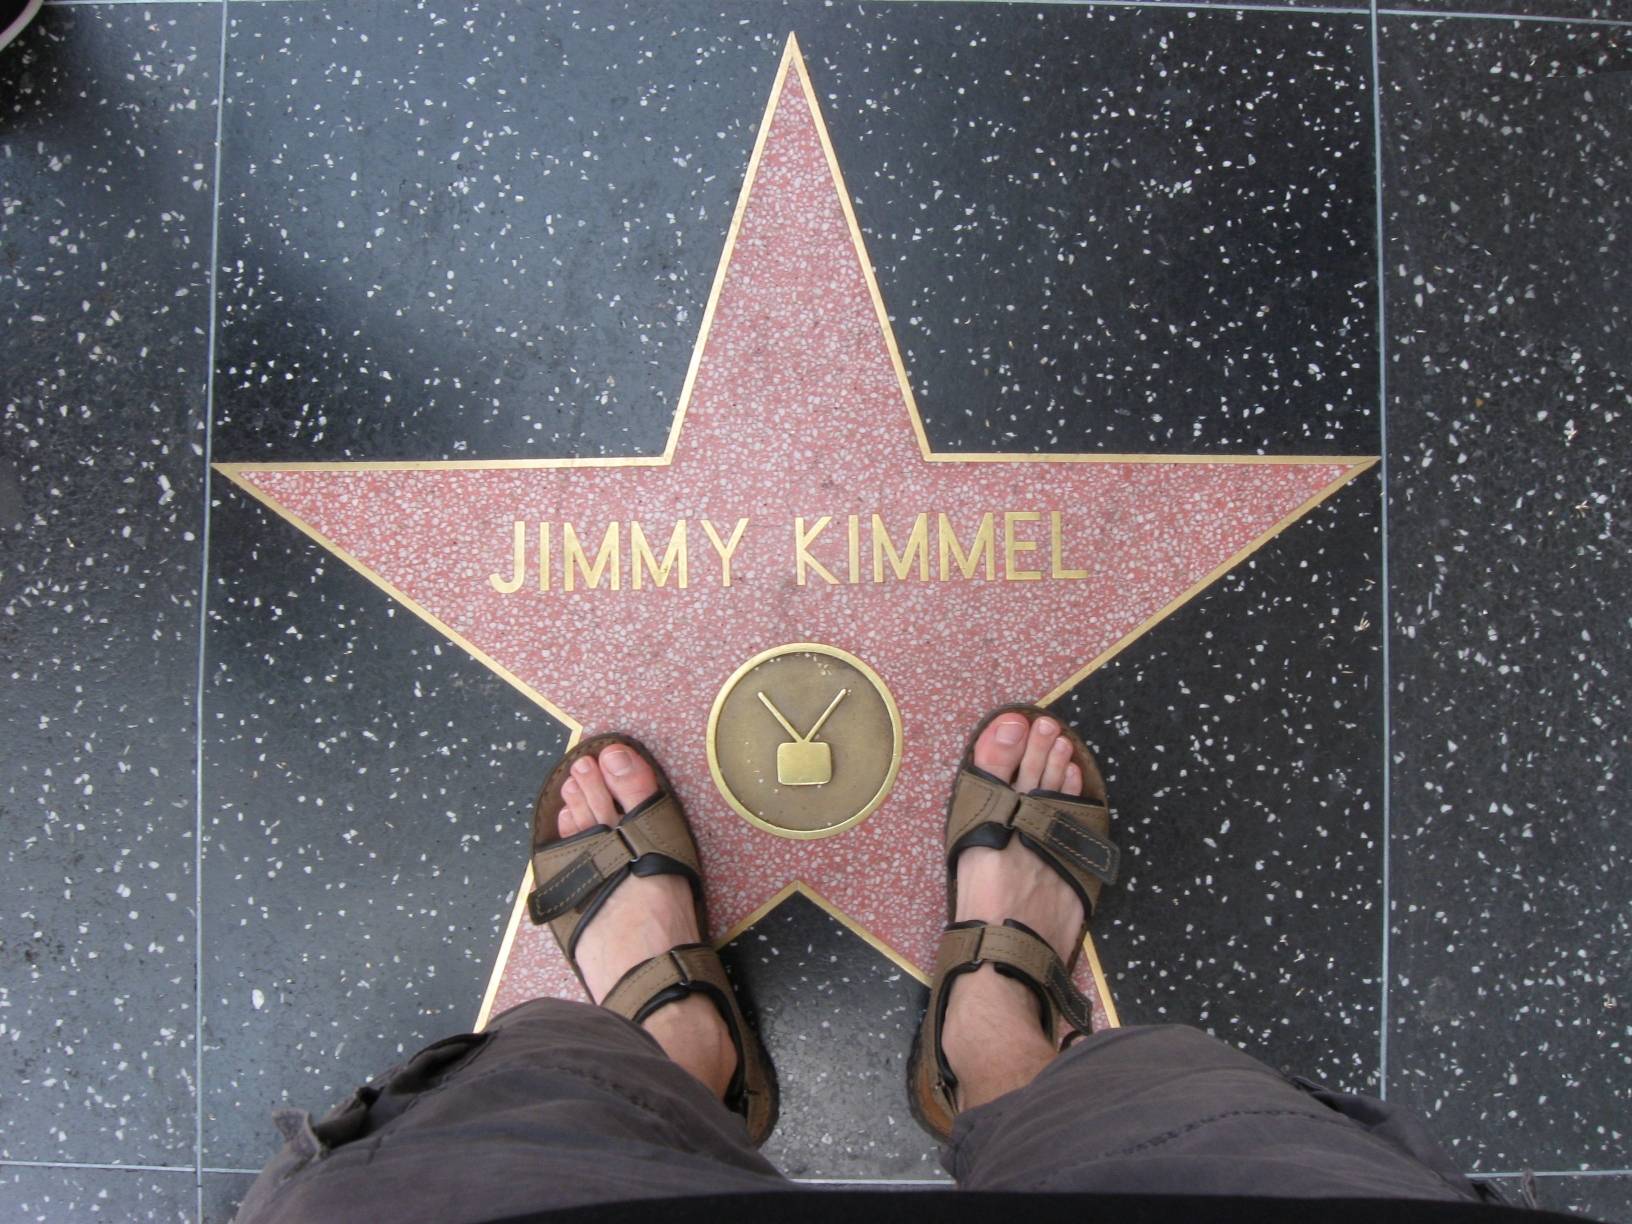 Image: Me standing on the Jimmy Kimmel's tile on the Walk of Fame in front of the Jimmy Kimmel Live studio